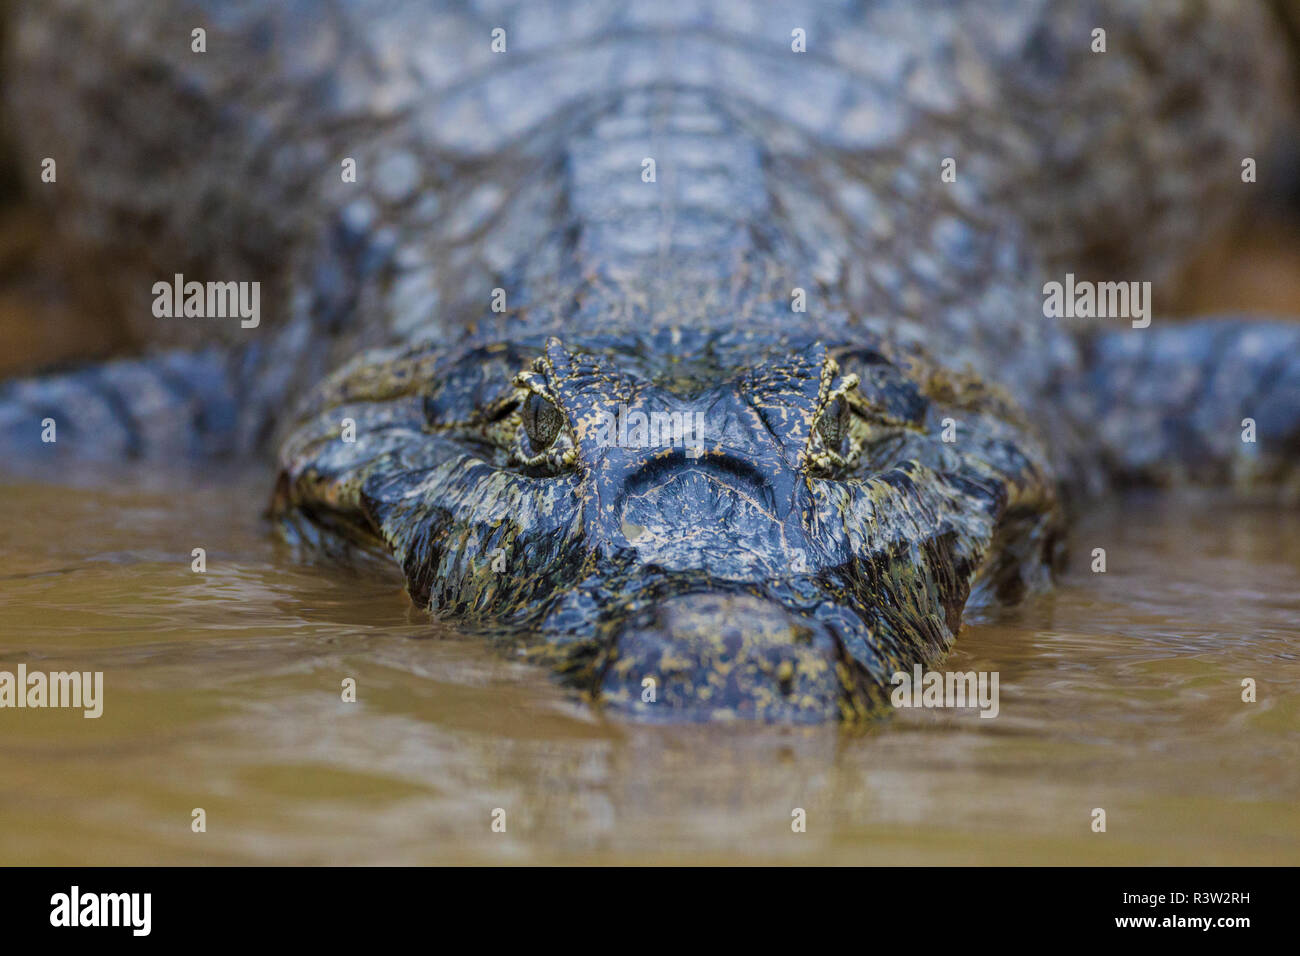 Brazil. A spectacled caiman (Caiman crocodilus) commonly found in the Pantanal, the world's largest tropical wetland area, UNESCO World Heritage Site. Stock Photo